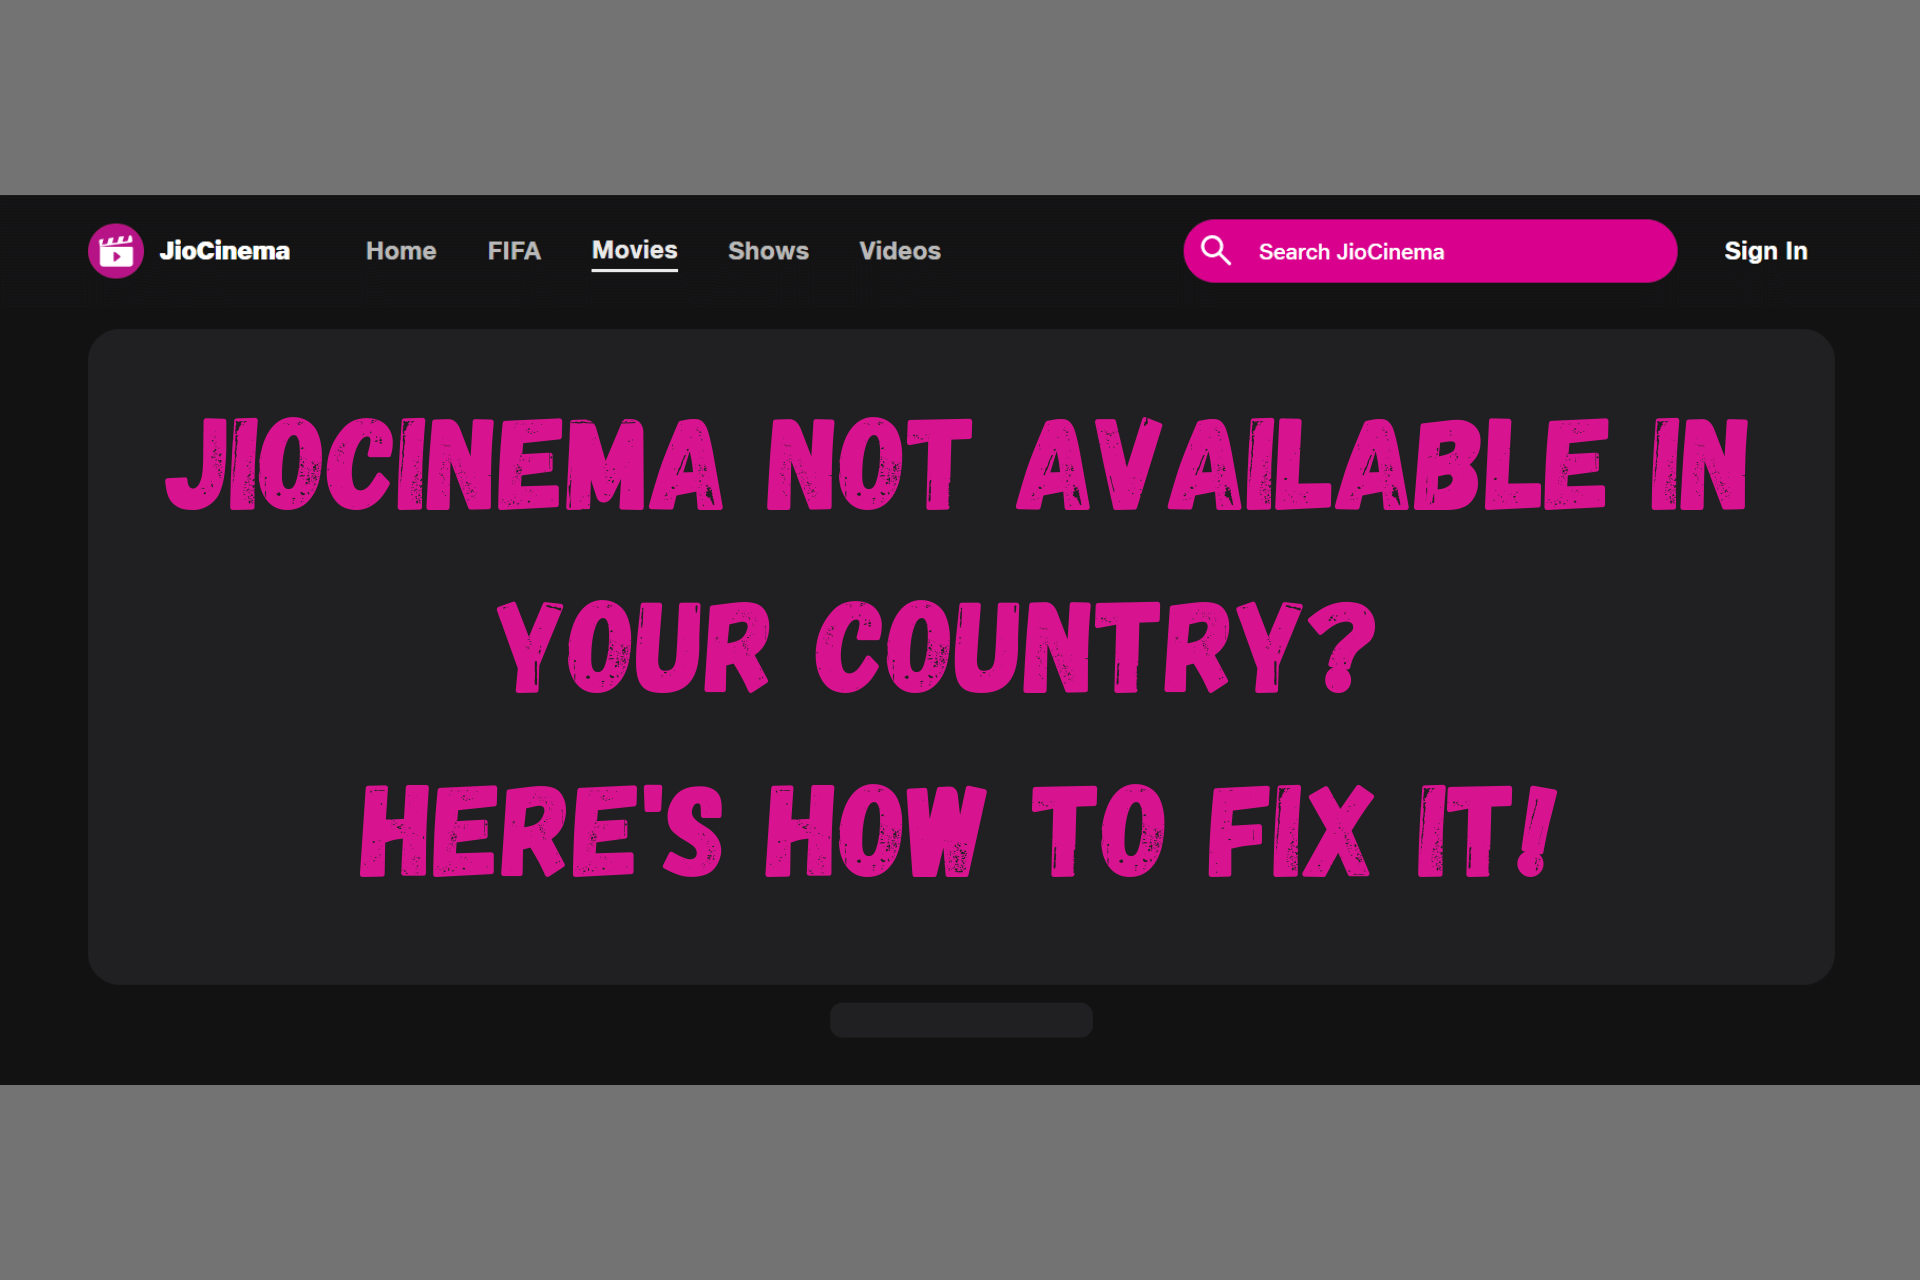 JioCinema not available in your country